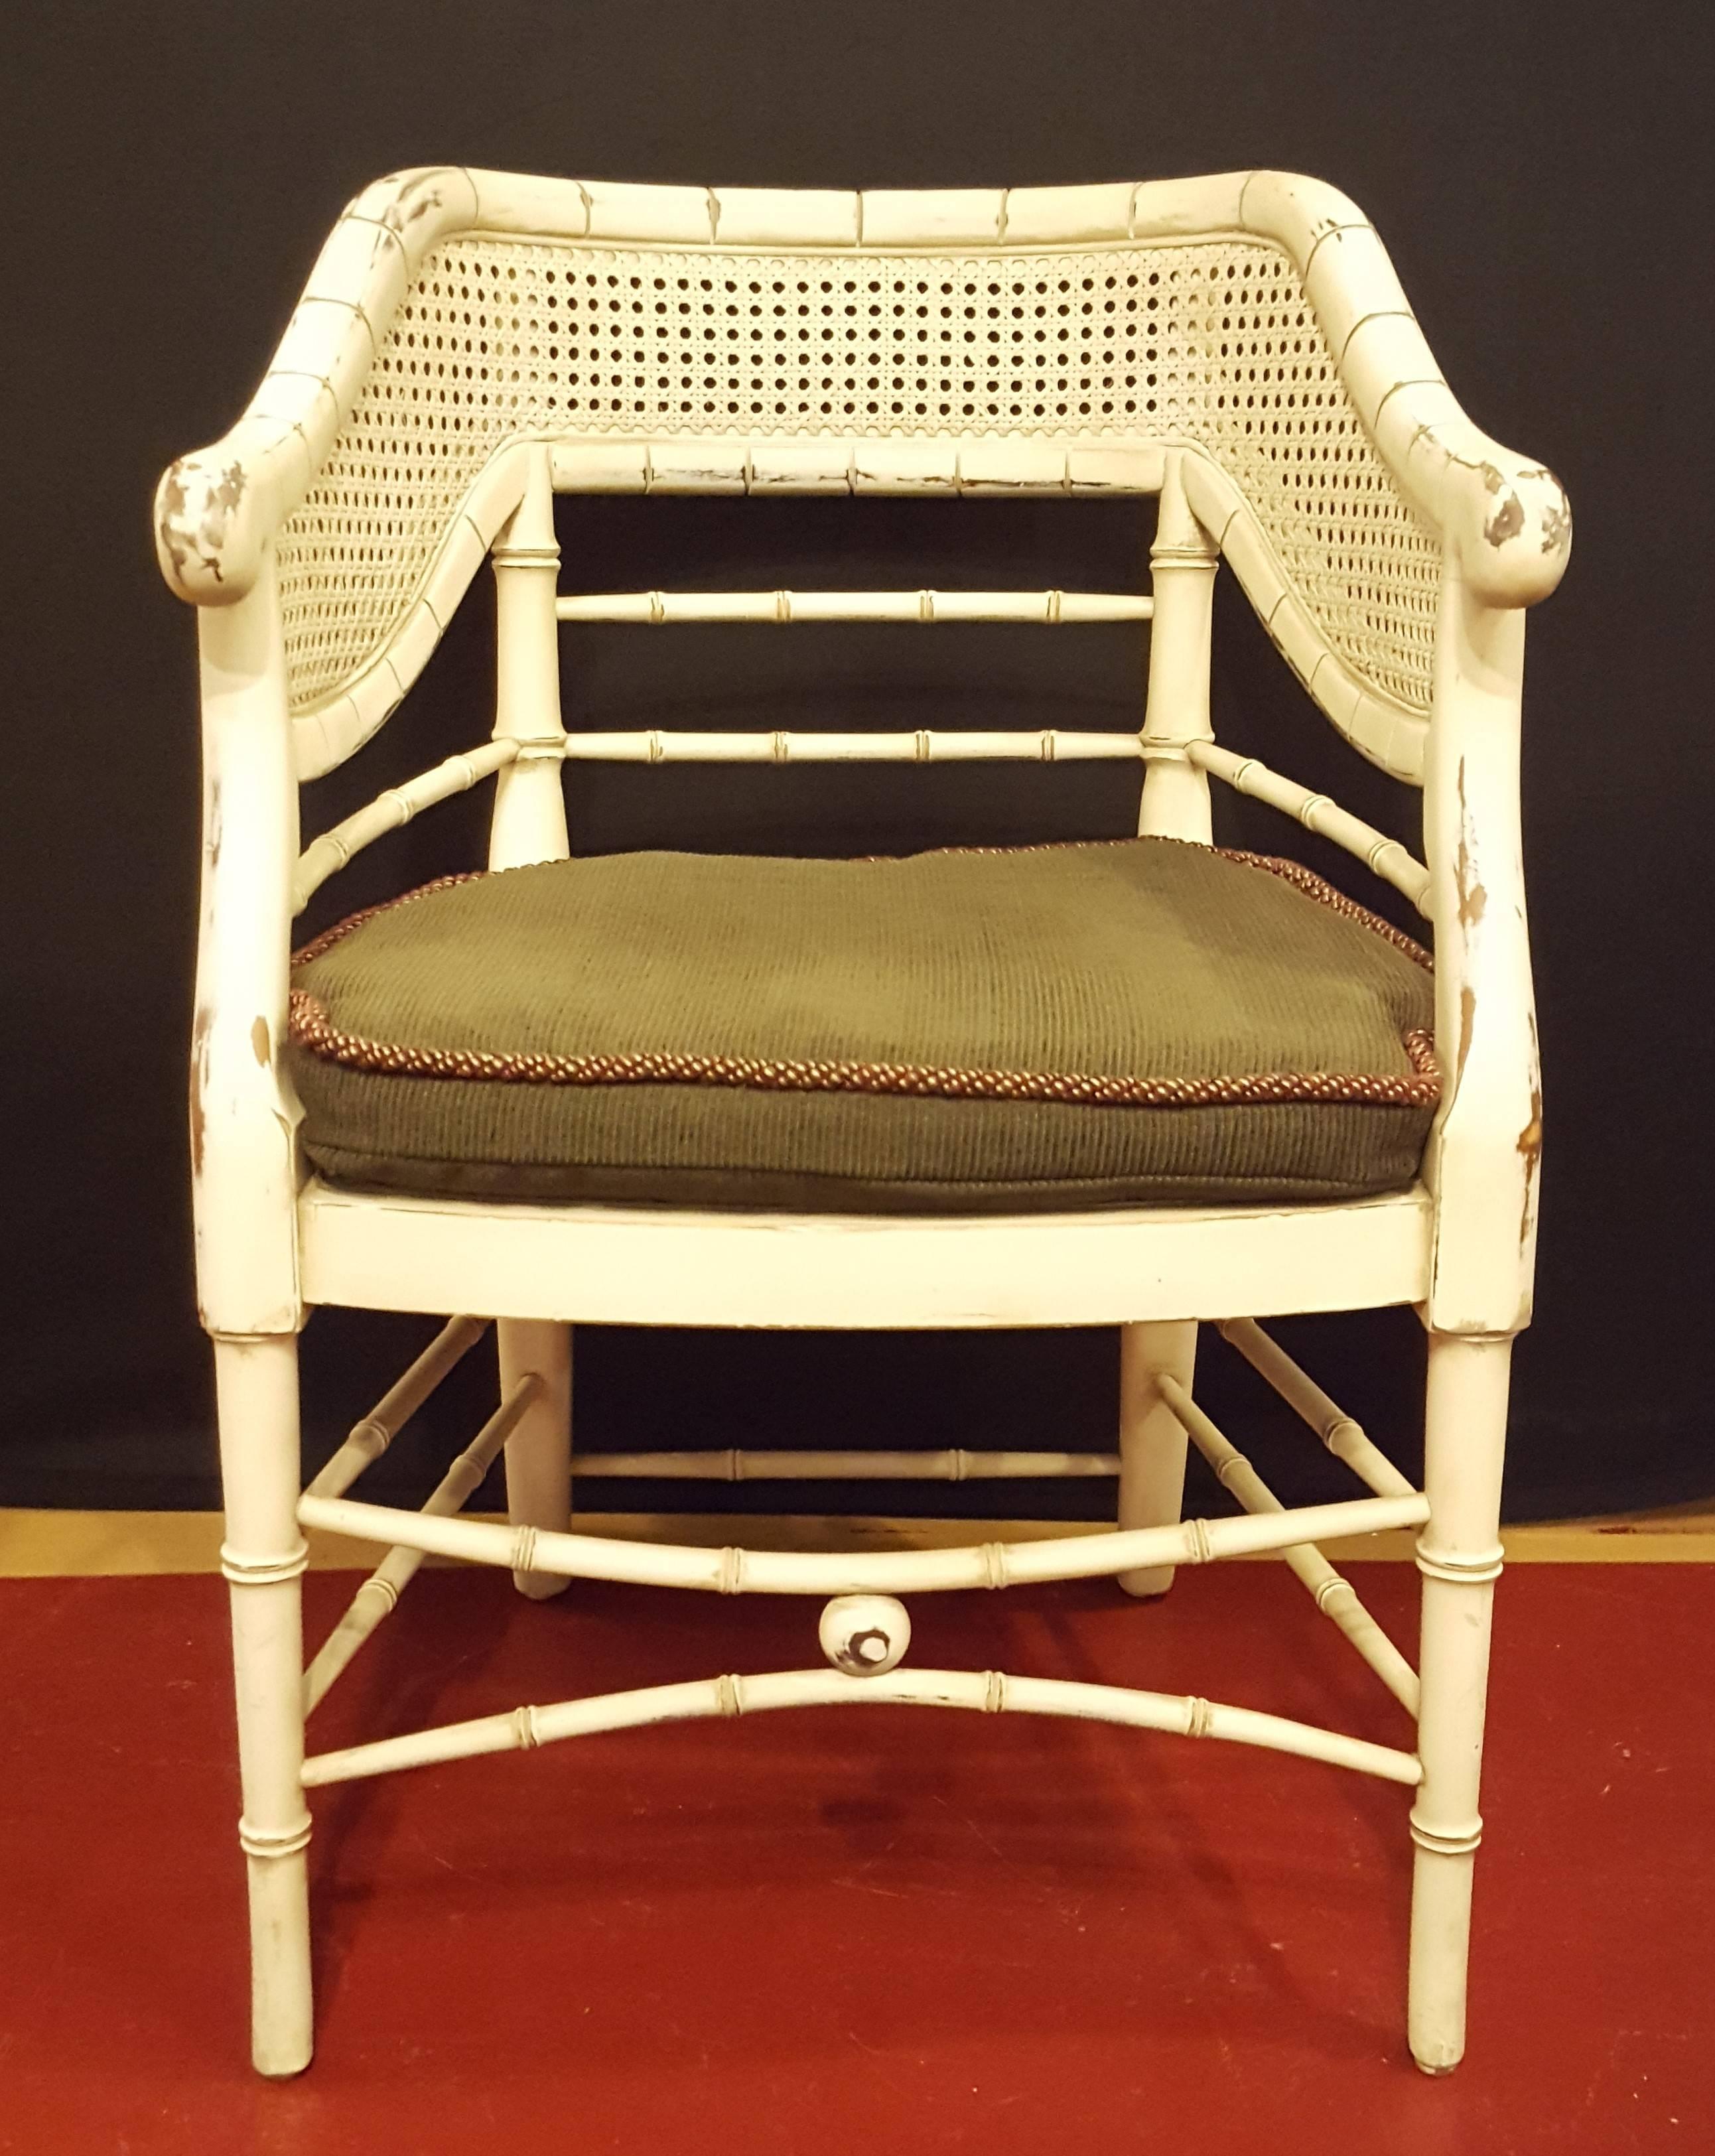 Pair of Mid Century bamboo chairs. In an off-white color, removable cushion, and comfortable curved backs.